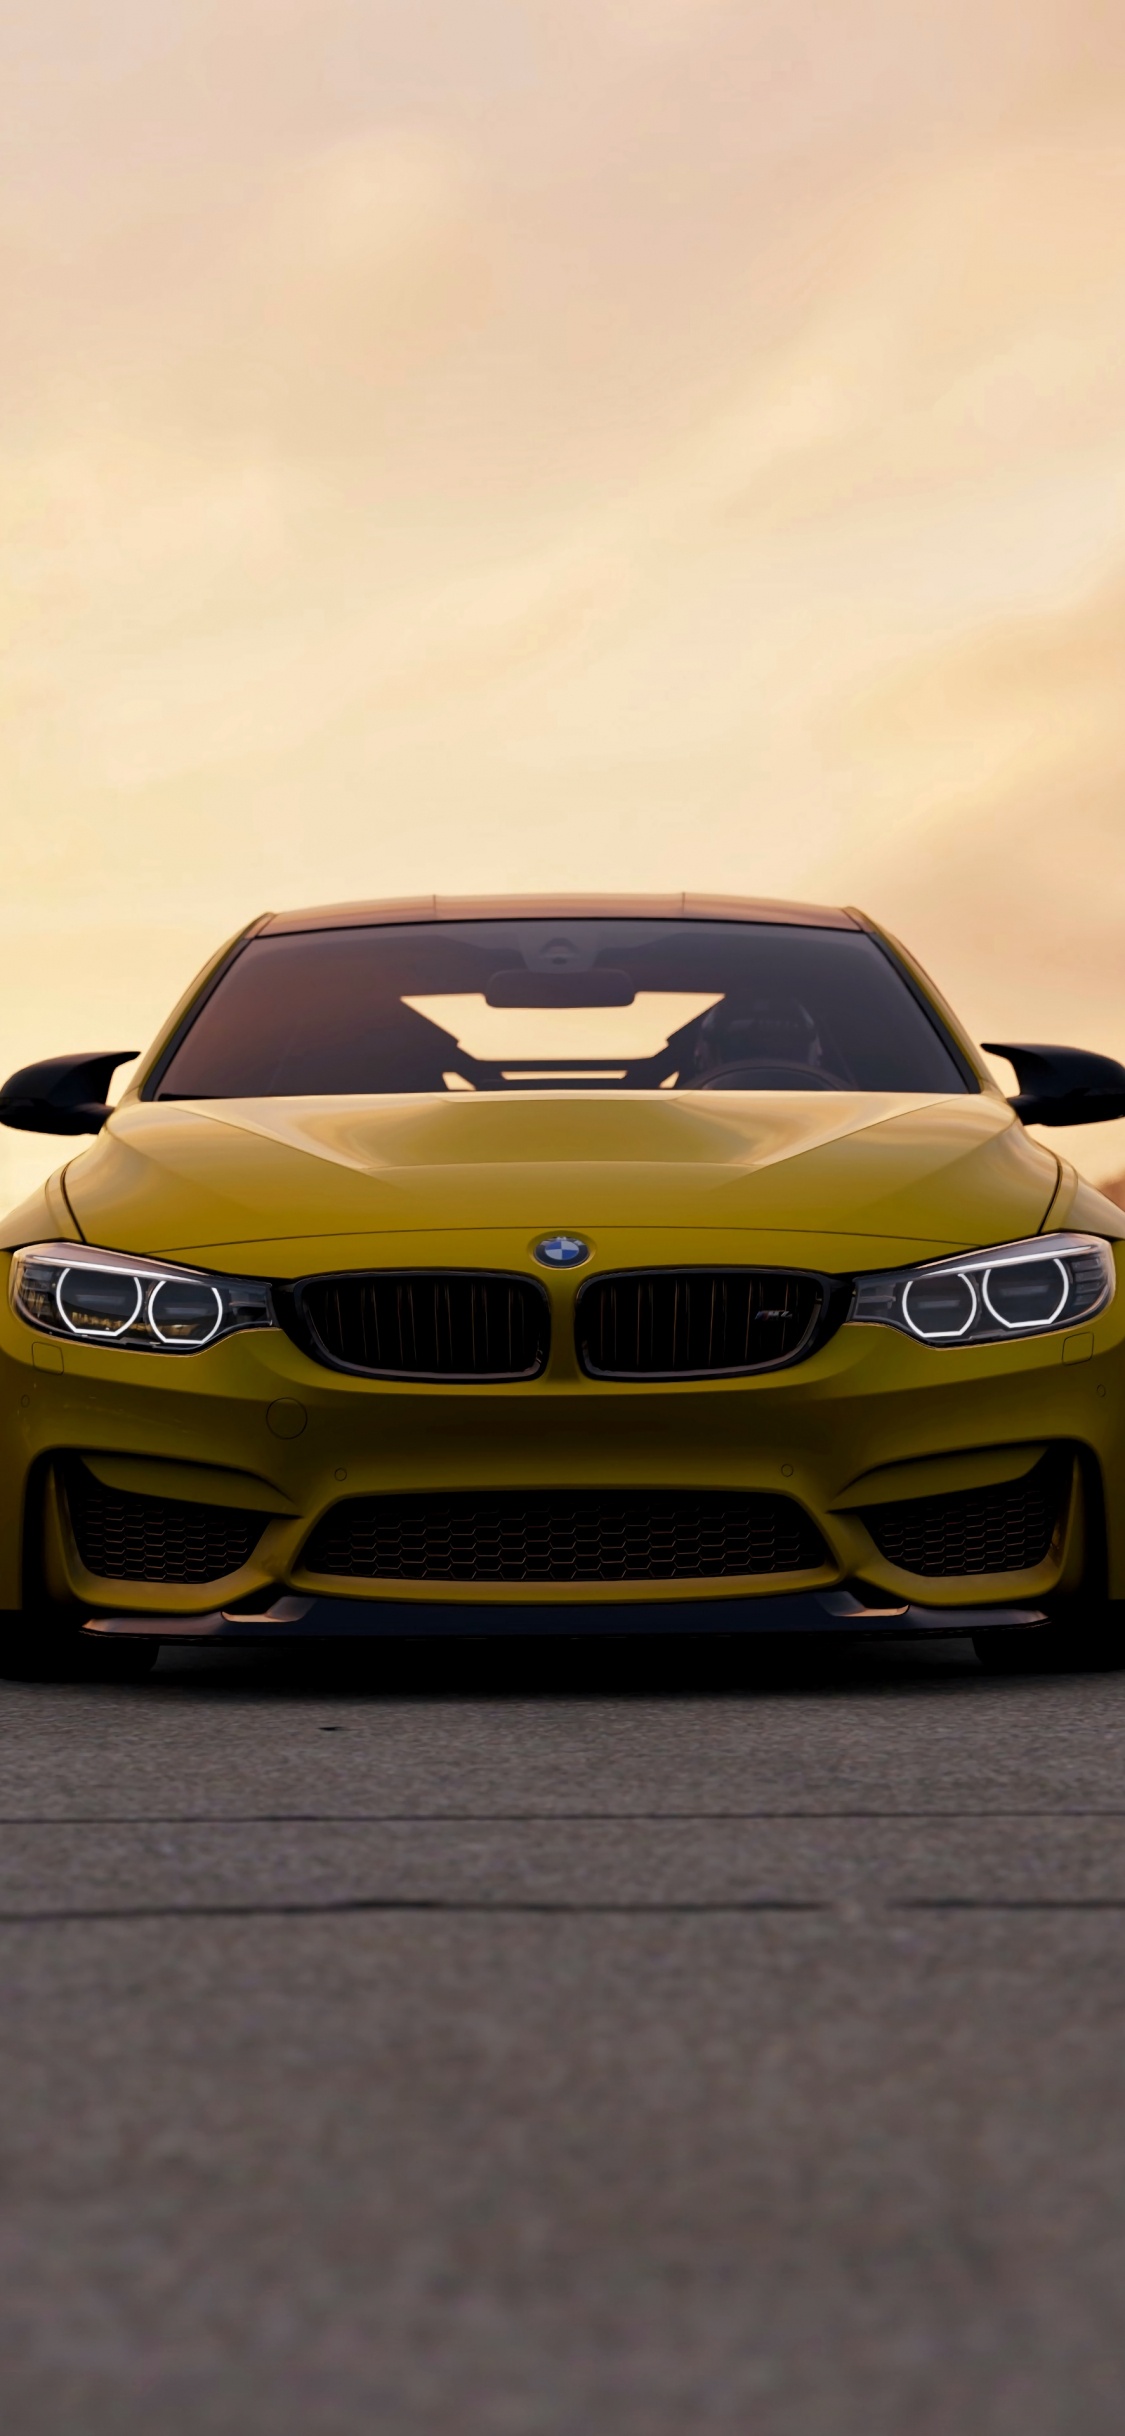 Brown Bmw m 3 on Road. Wallpaper in 1125x2436 Resolution